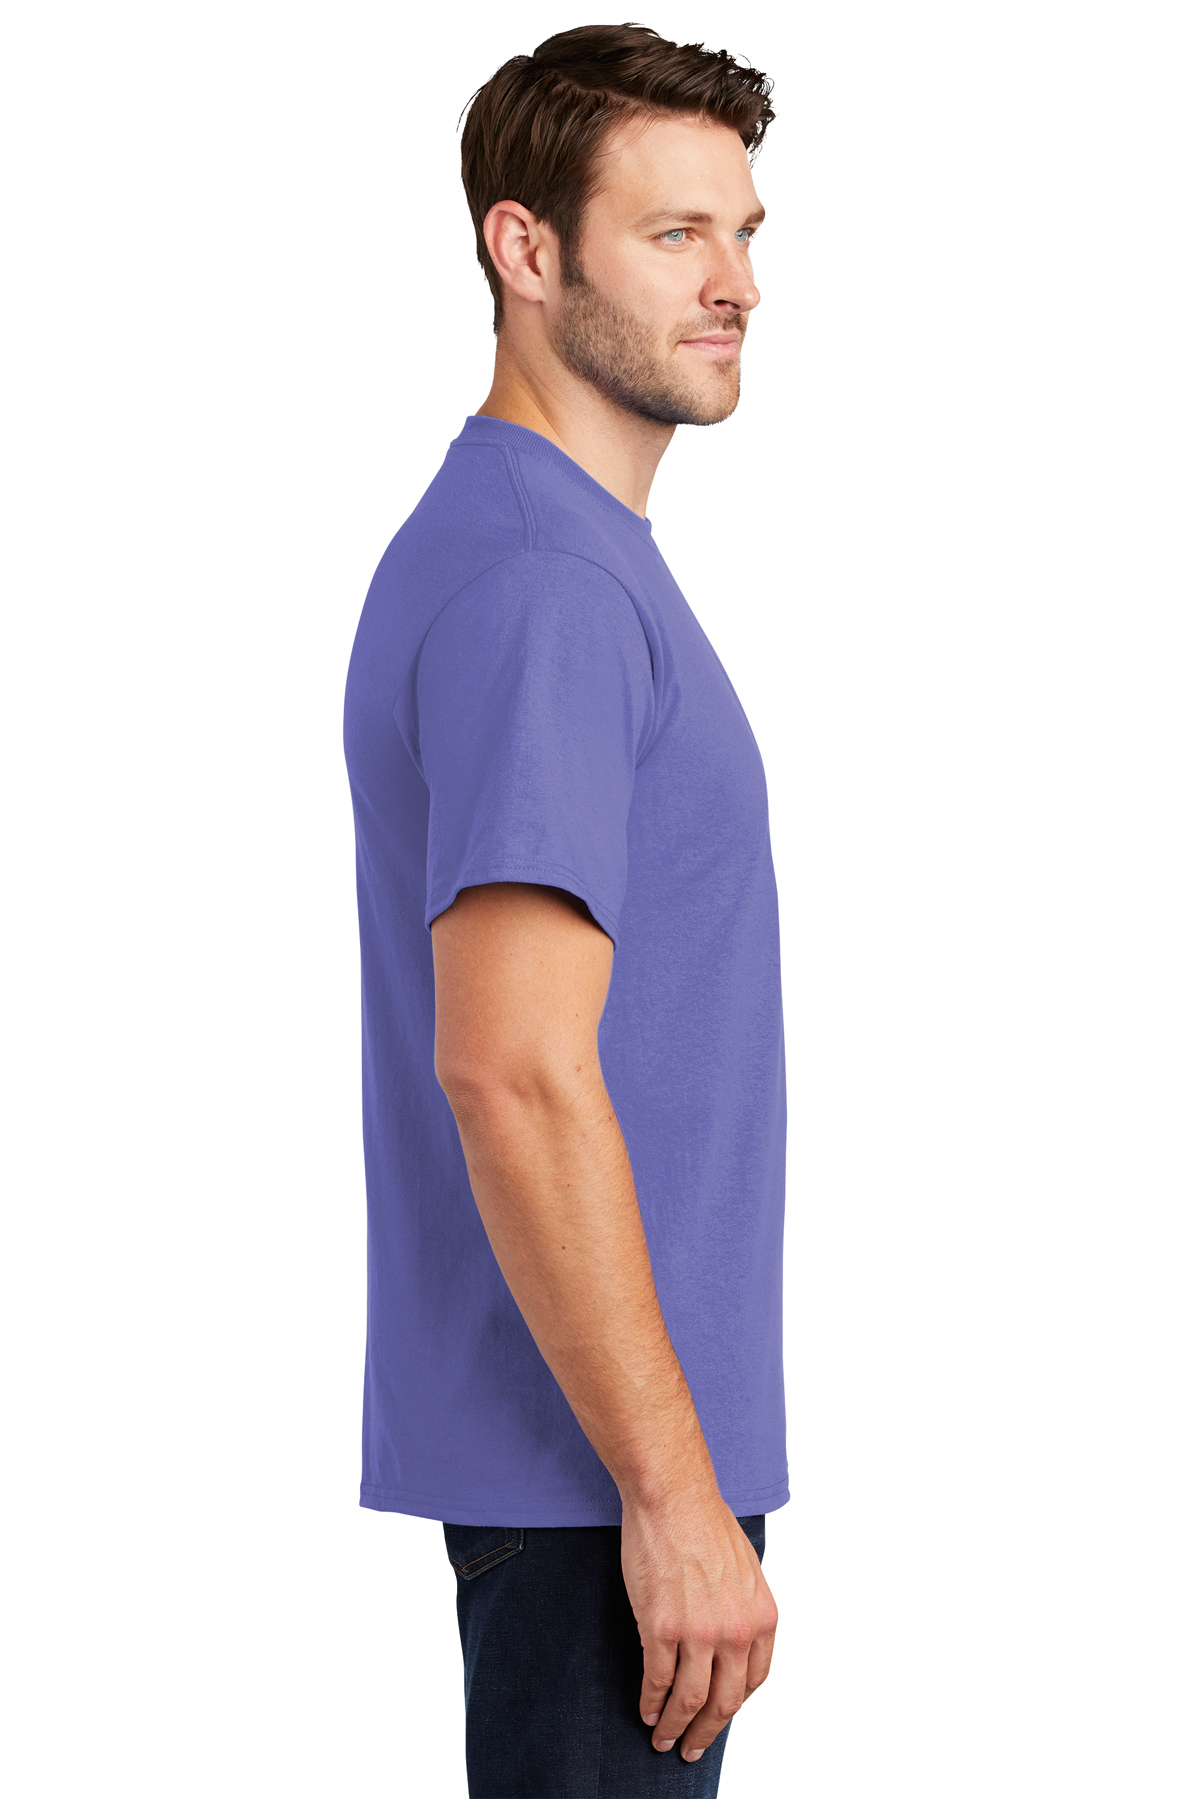 Port & Company Essential Tee, Product